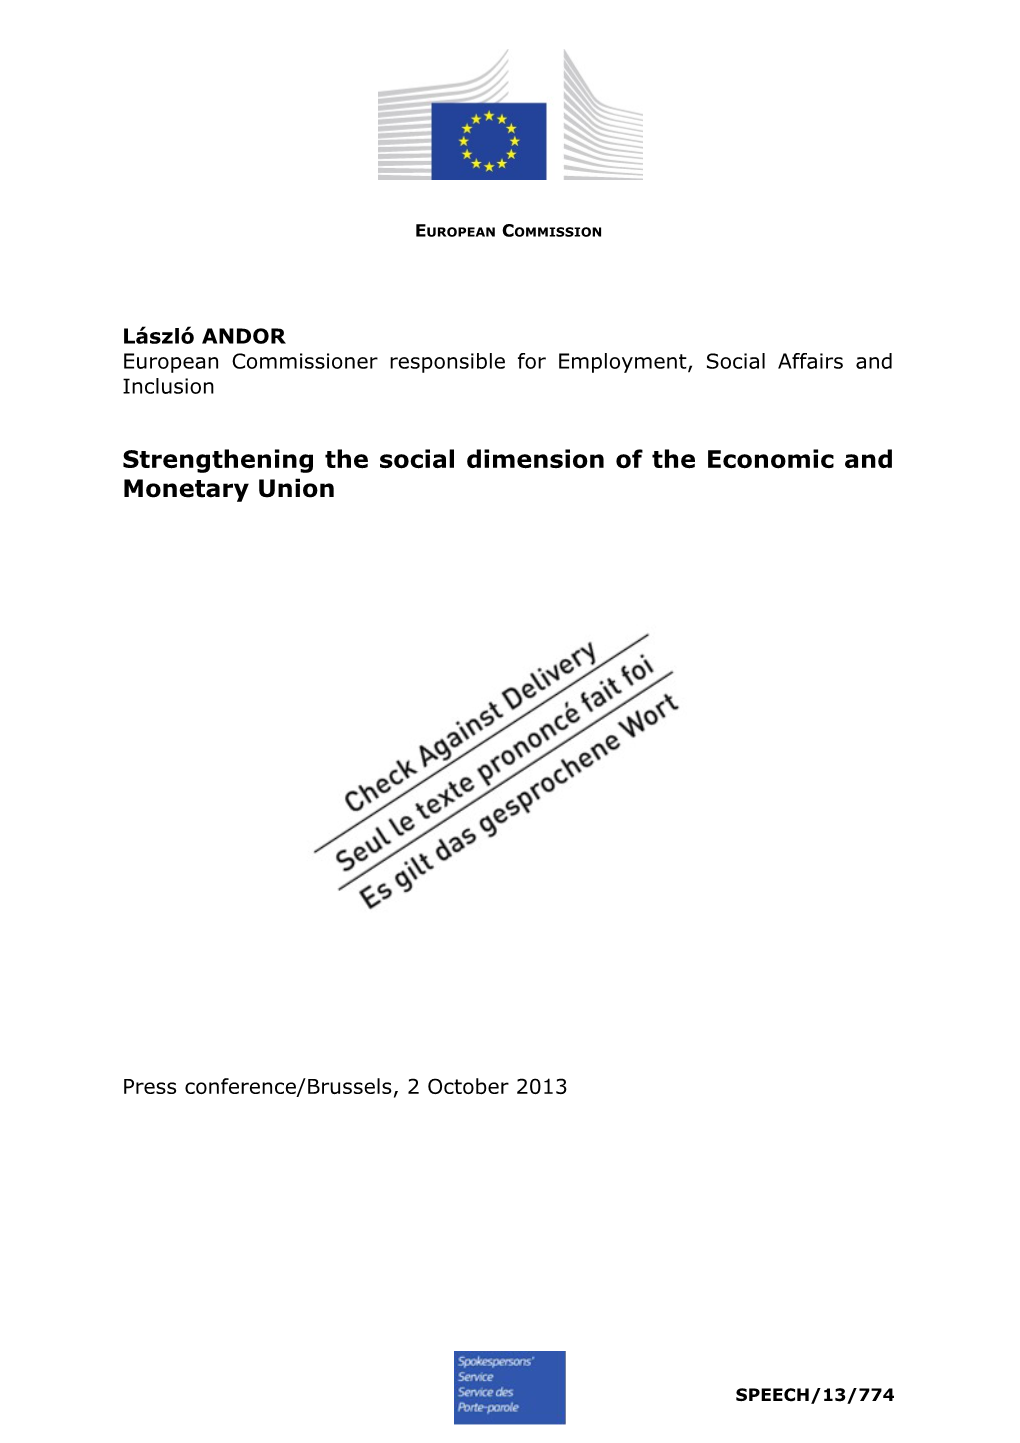 Strengthening the Social Dimension of the Economic and Monetary Union